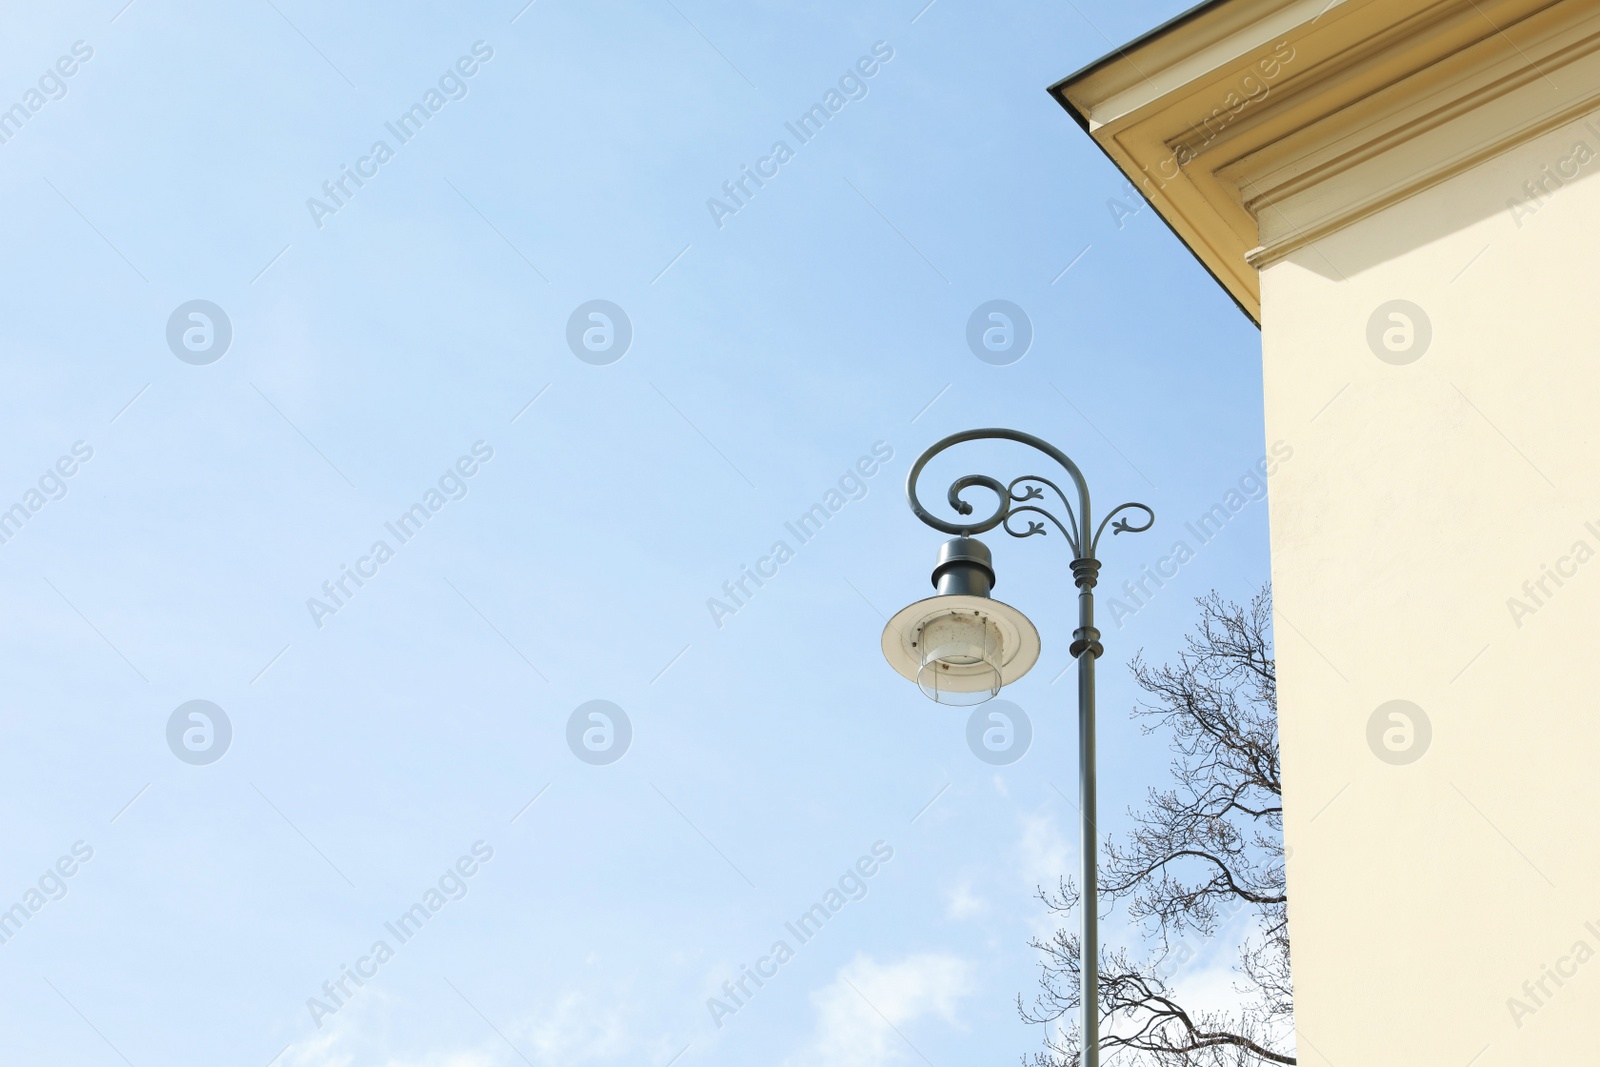 Photo of Old fashioned street light lamp near building against cloudy sky